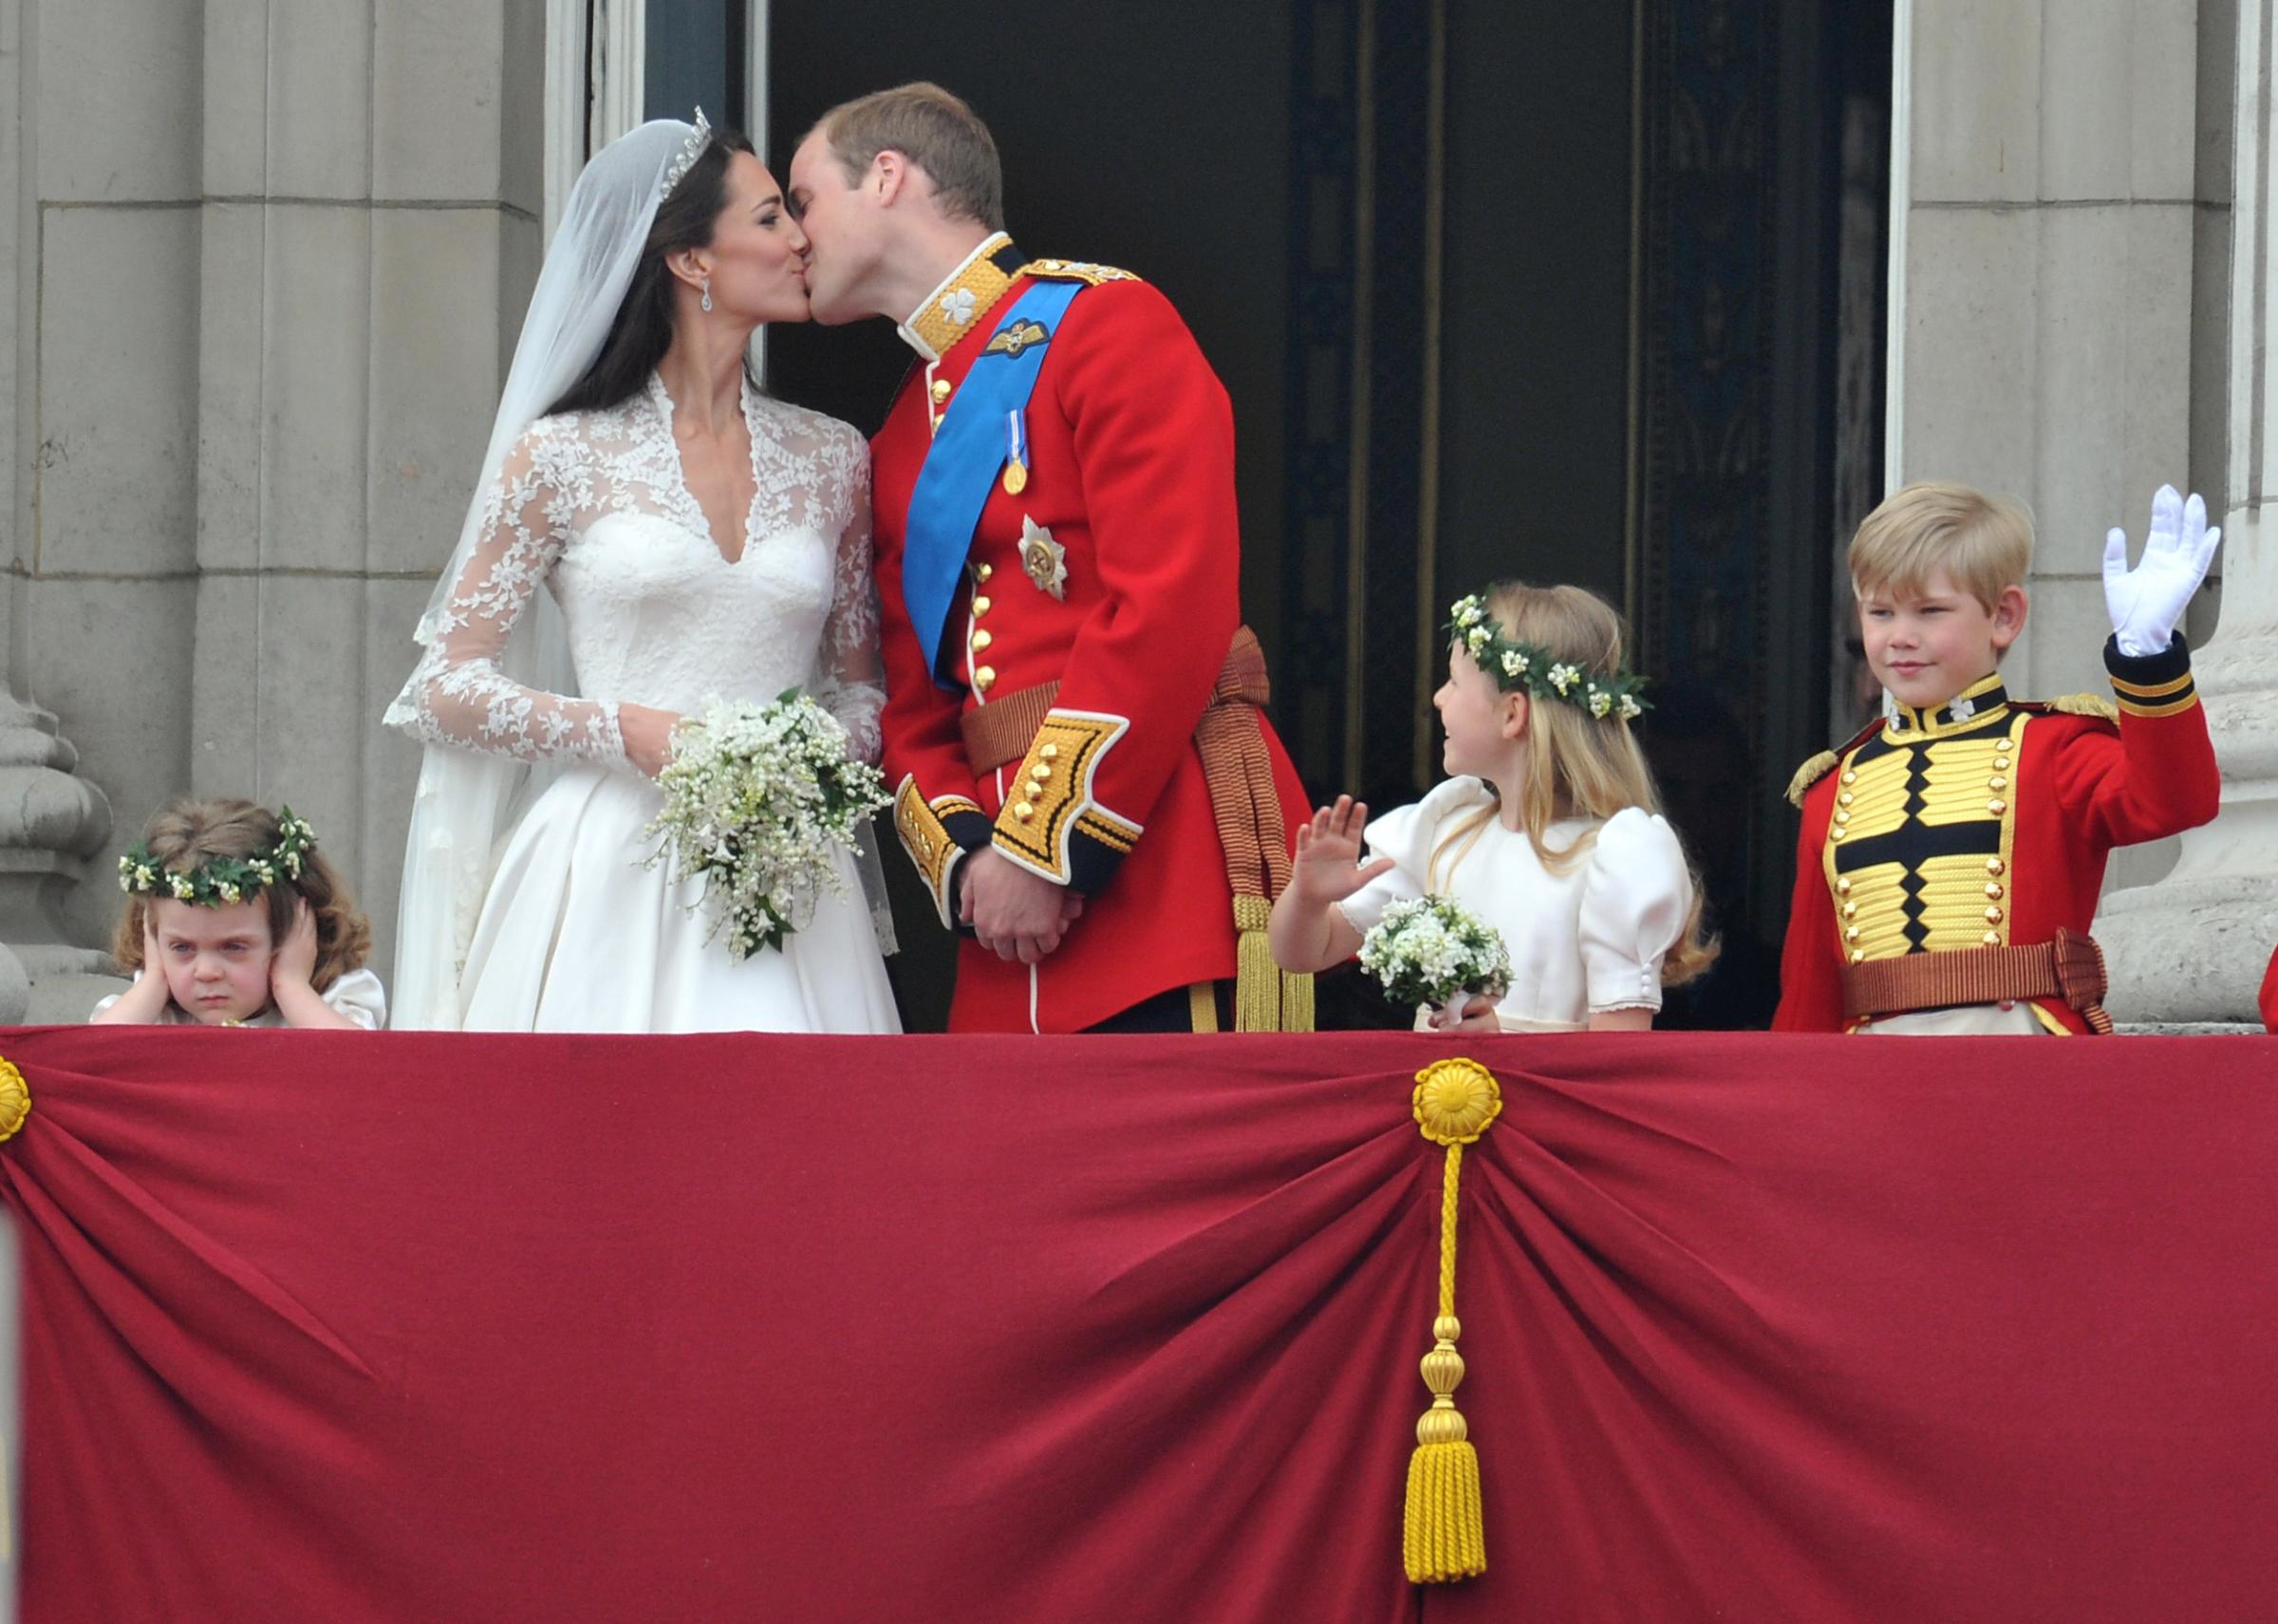 Princess Catherine and Prince William on the balcony of Buckingham Palace in London, Britain, April 29, 2011, after their marriage ceremony.